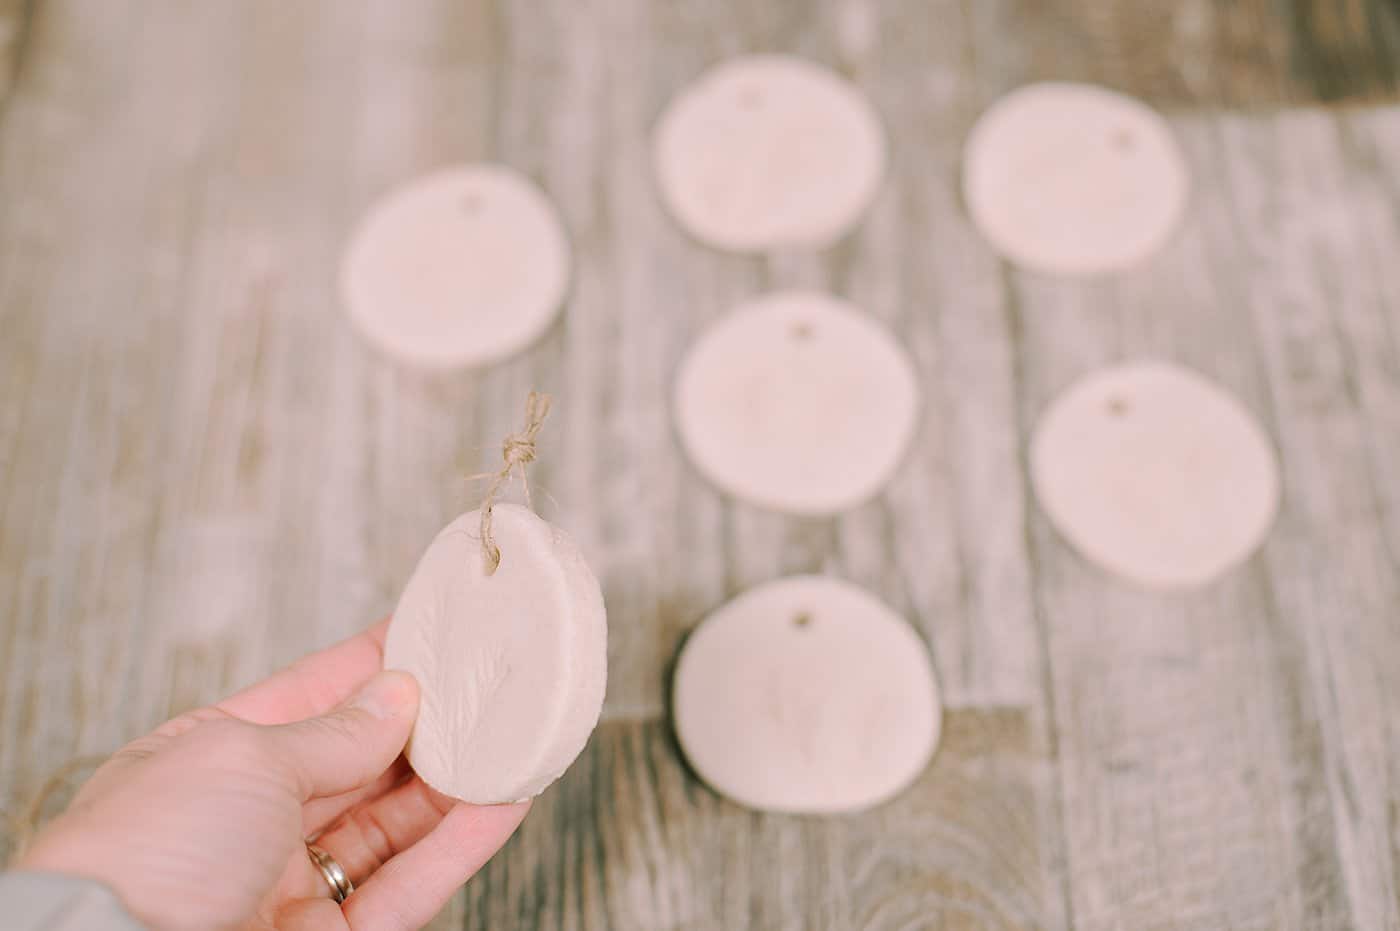 Salt dough ornaments with pine needles pressed into them.